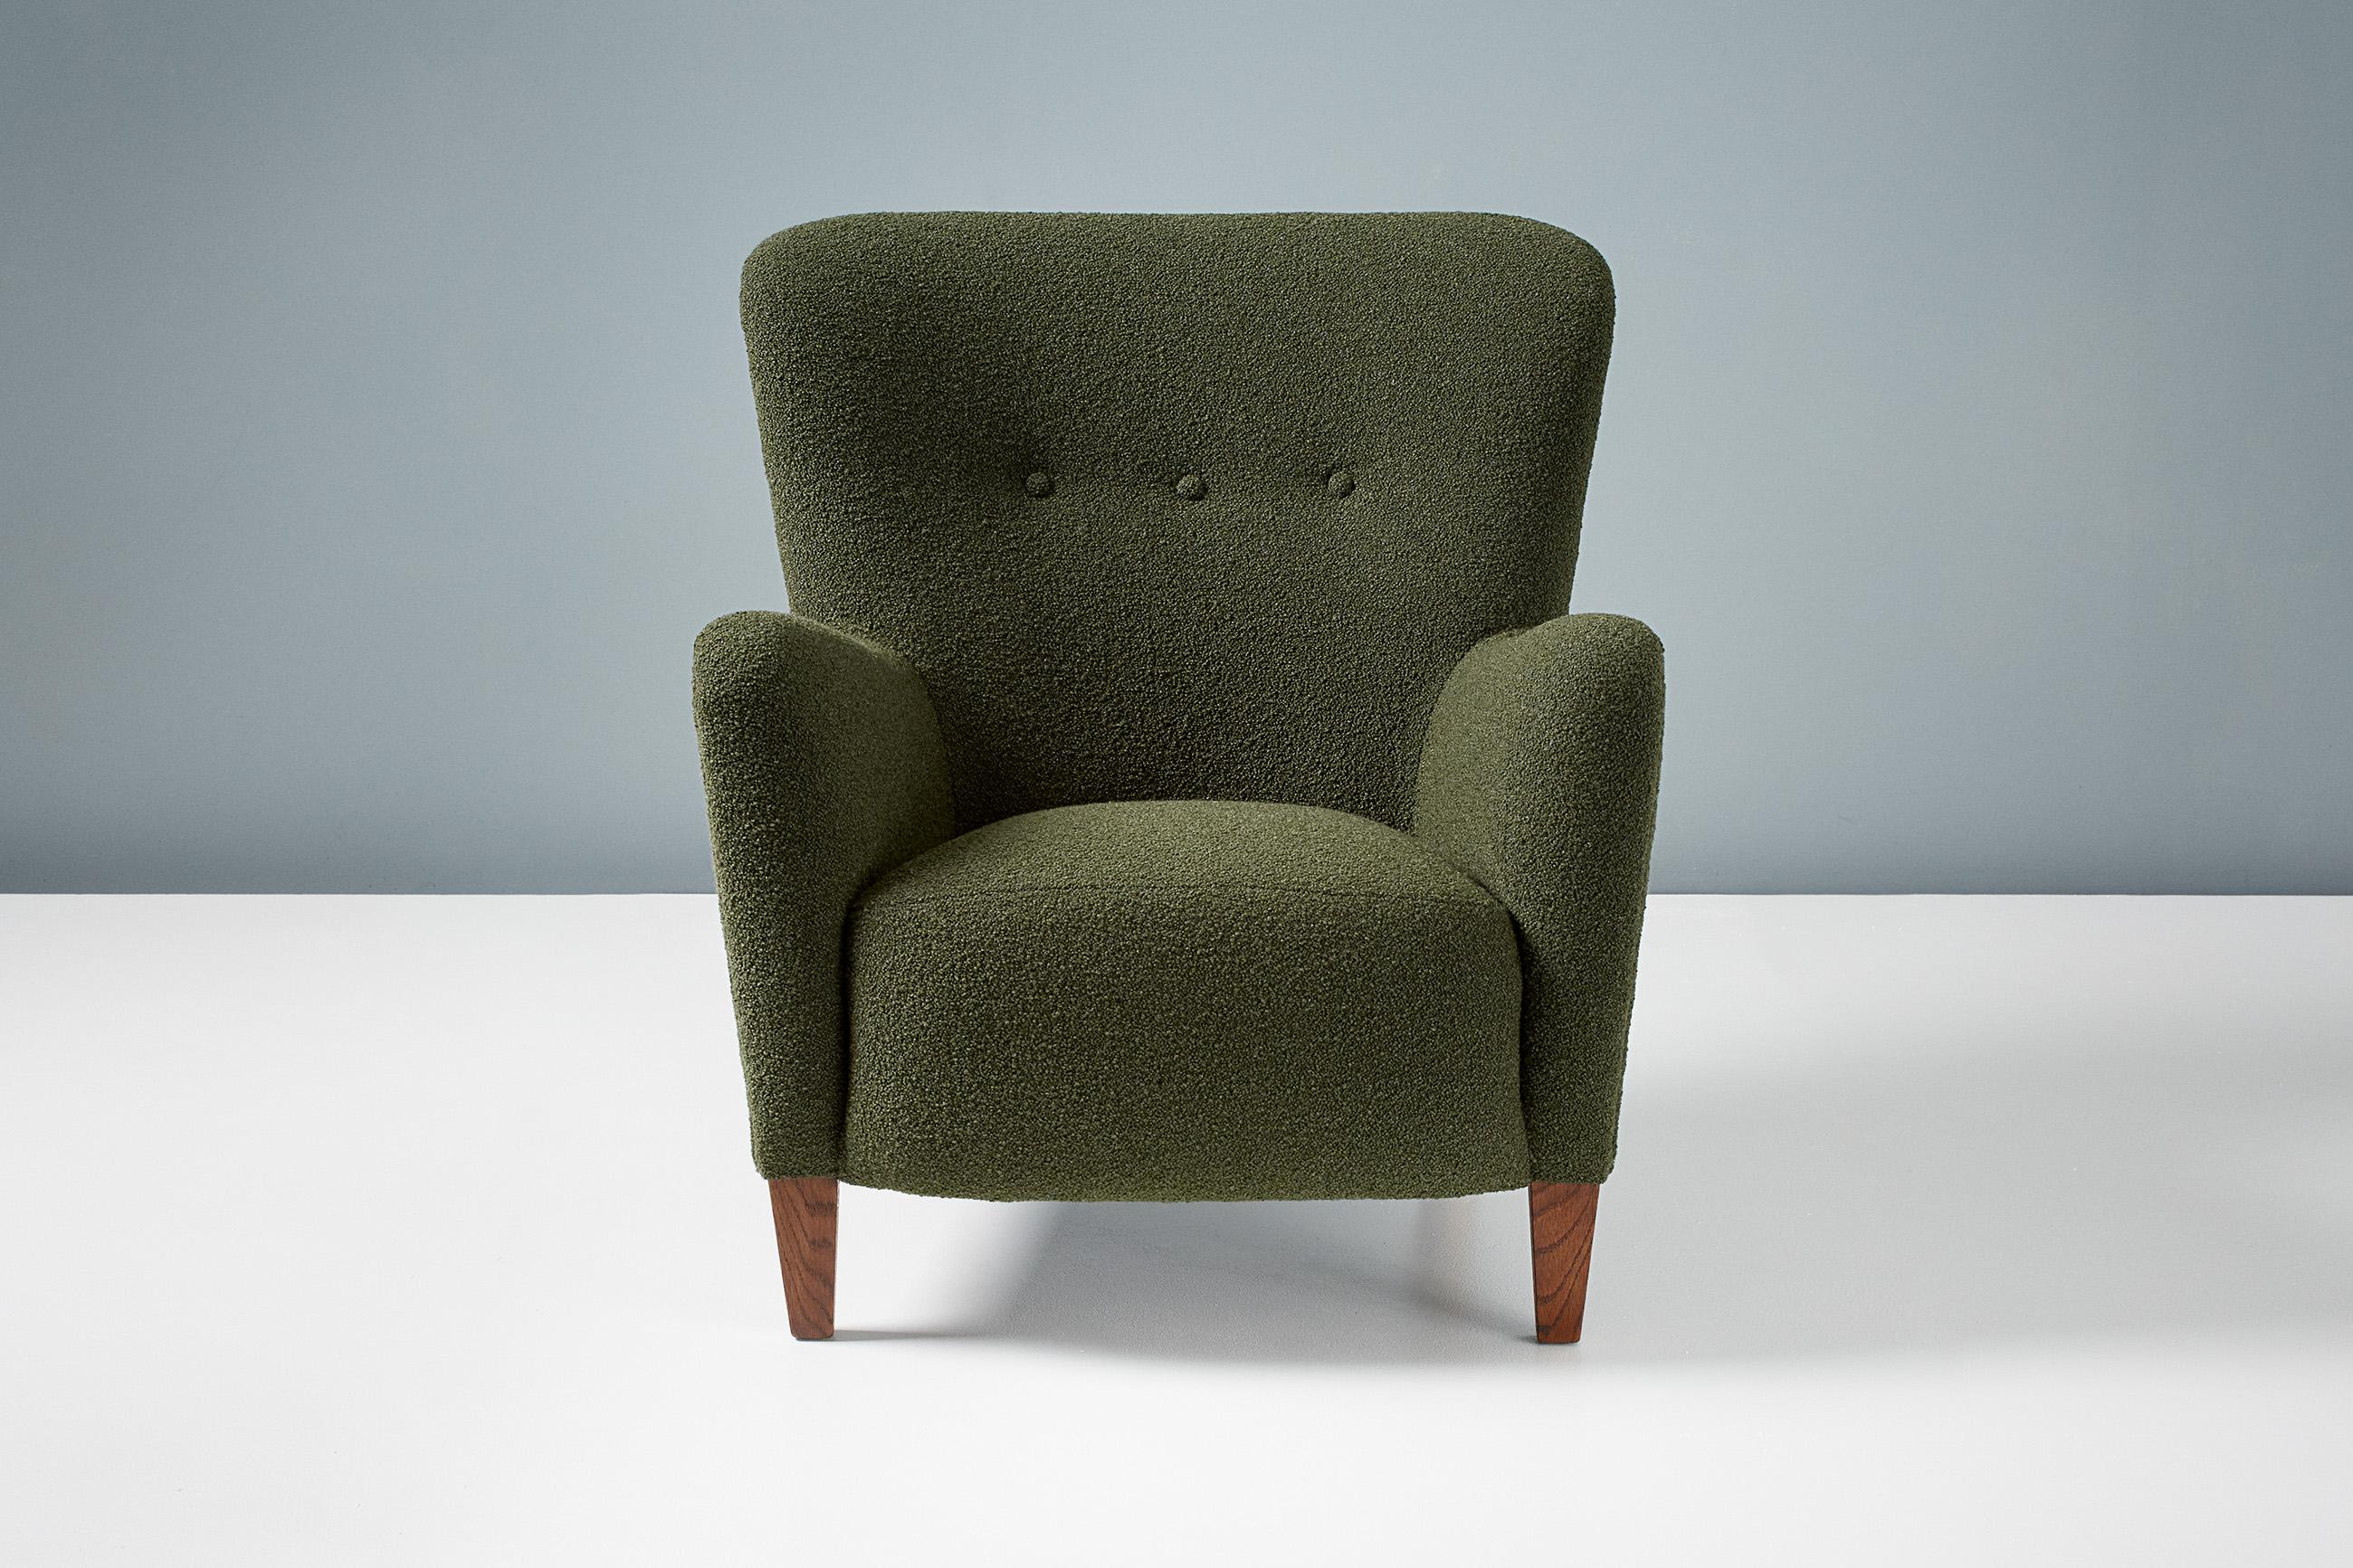 Dagmar design

RYO armchair

A custom made lounge chair developed and produced at our workshops in London using the highest quality materials. This example are upholstered in luxurious Chase Erwin boucle green fabric and features fumed oak legs.